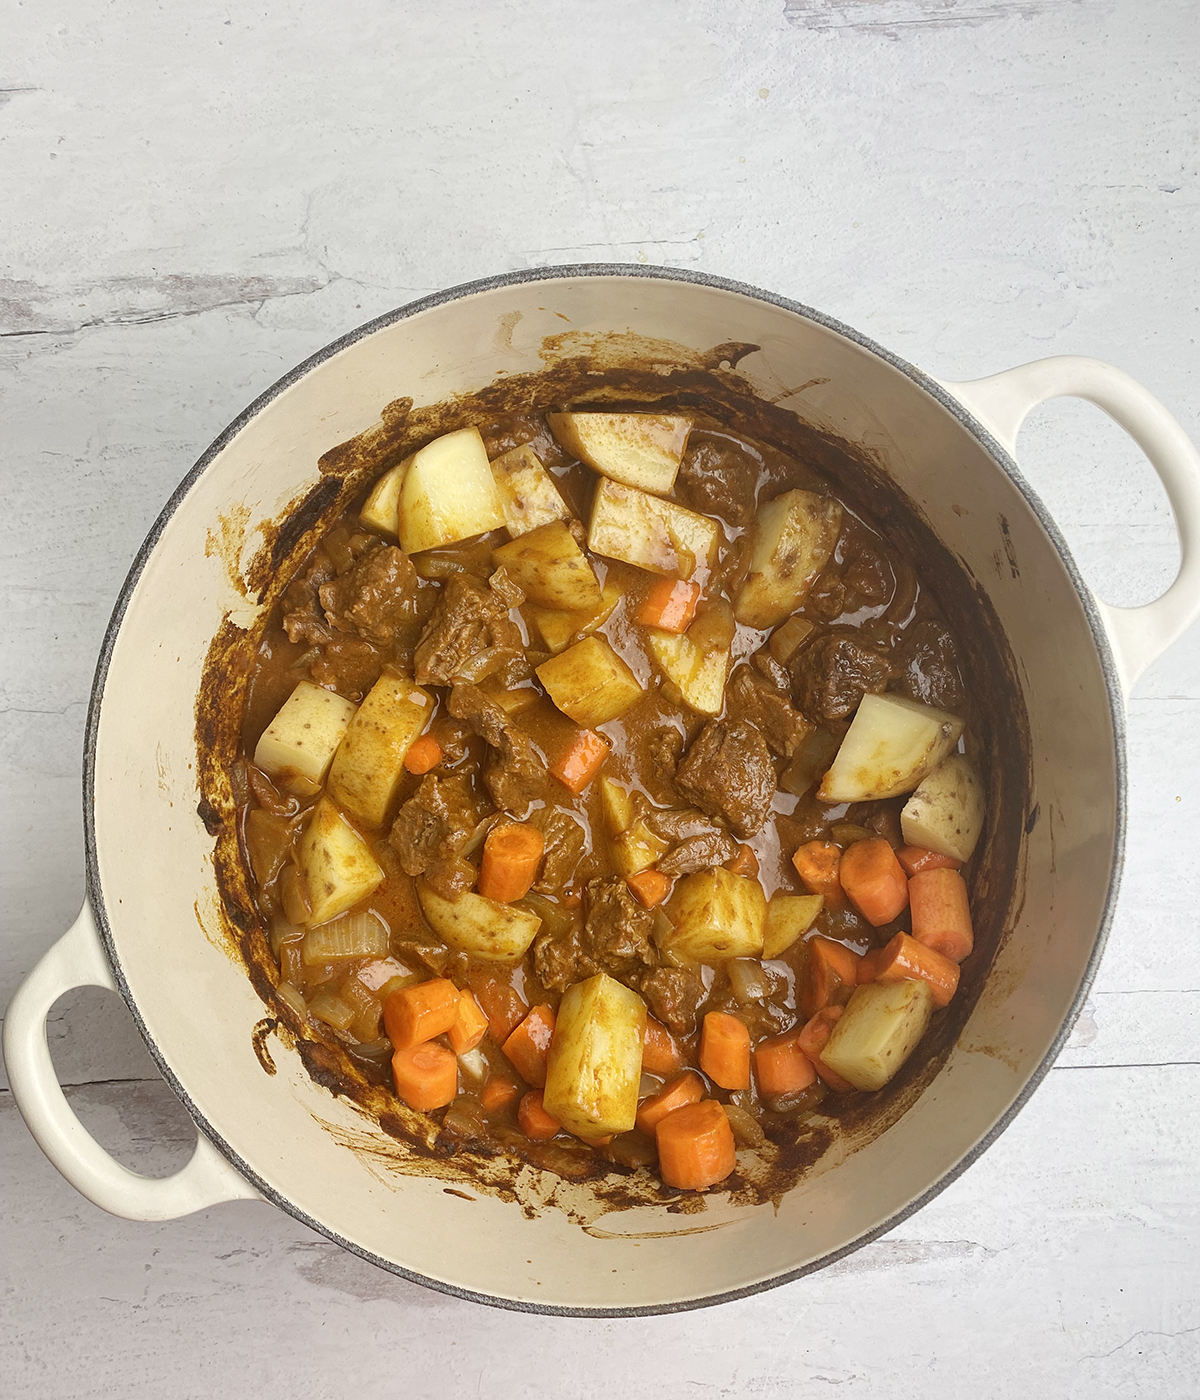 Coconut beef stew with all ingredients in a pot.